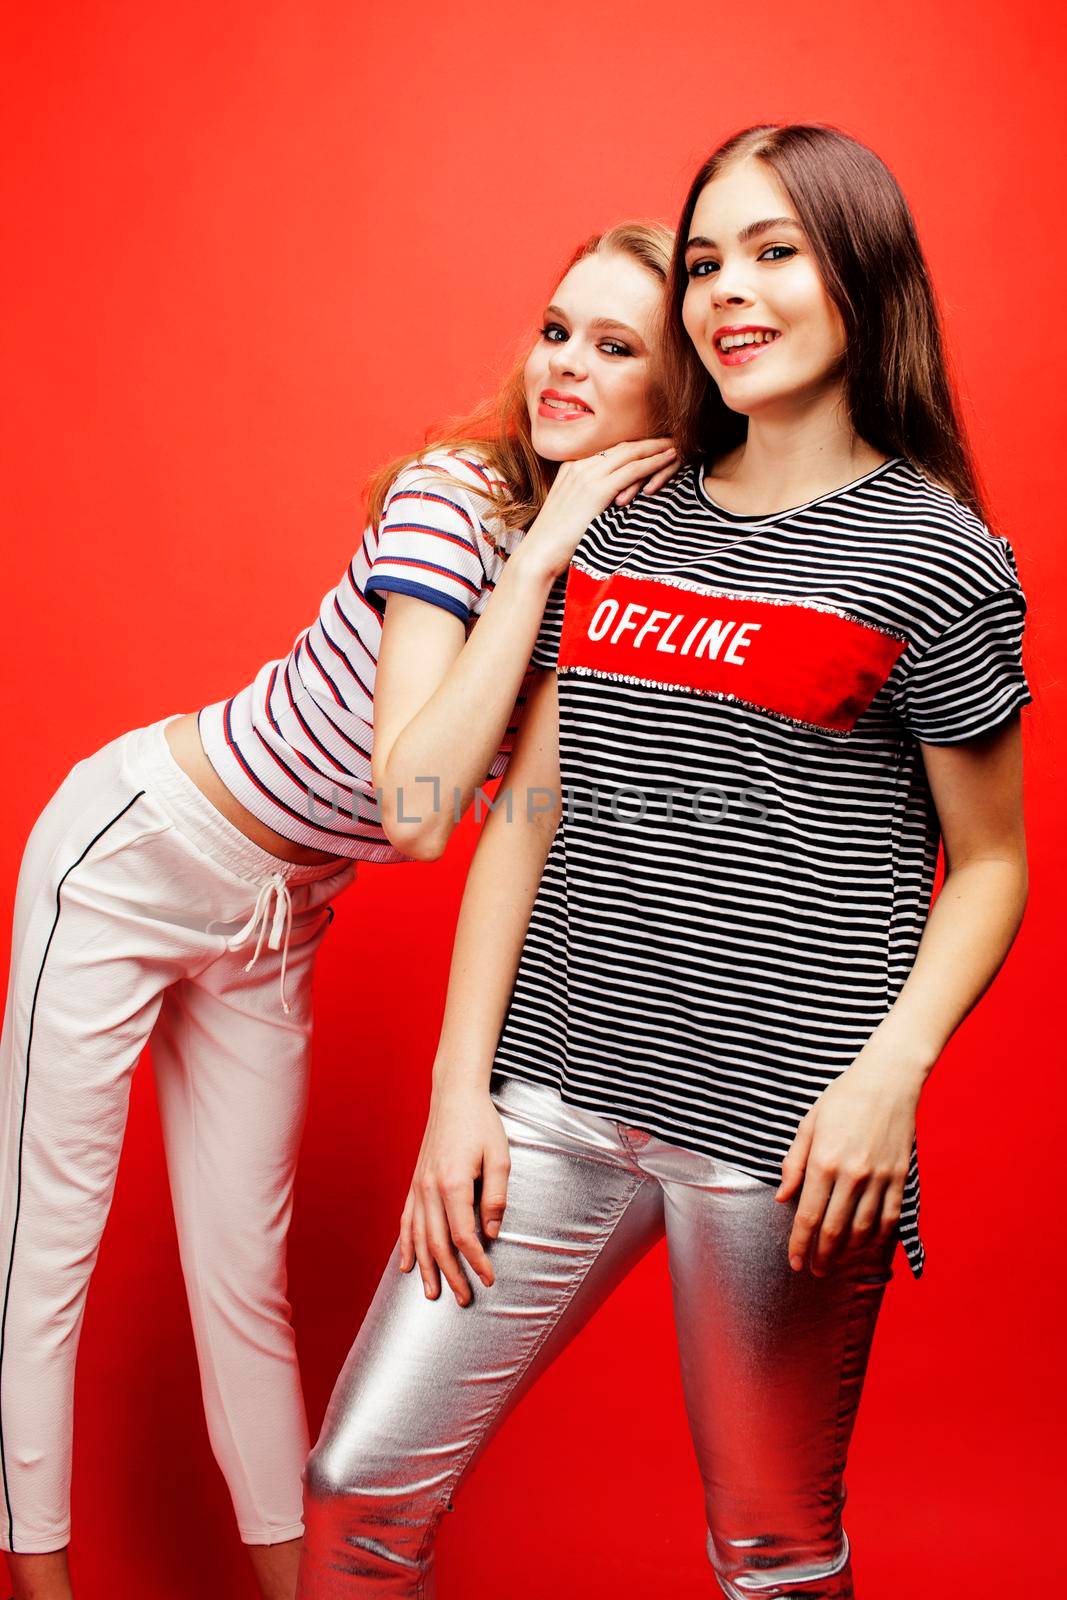 two best friends teenage girls together having fun, posing emotional on red background, besties happy smiling, lifestyle people concept by JordanJ